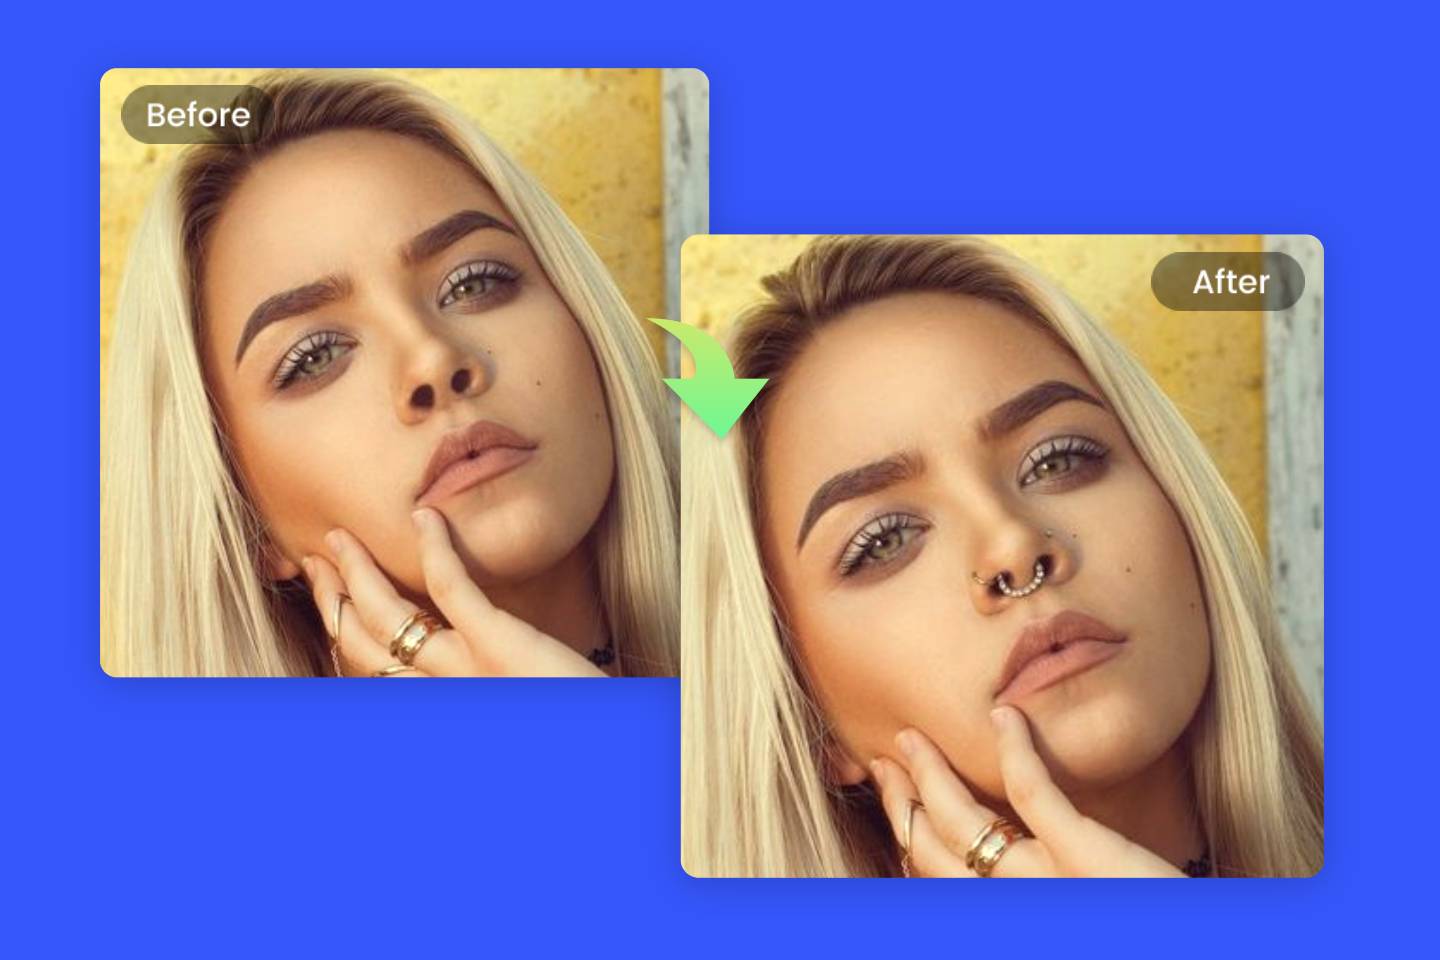 Nose piercing banner with a comparison picture of a woman with and without nose ring